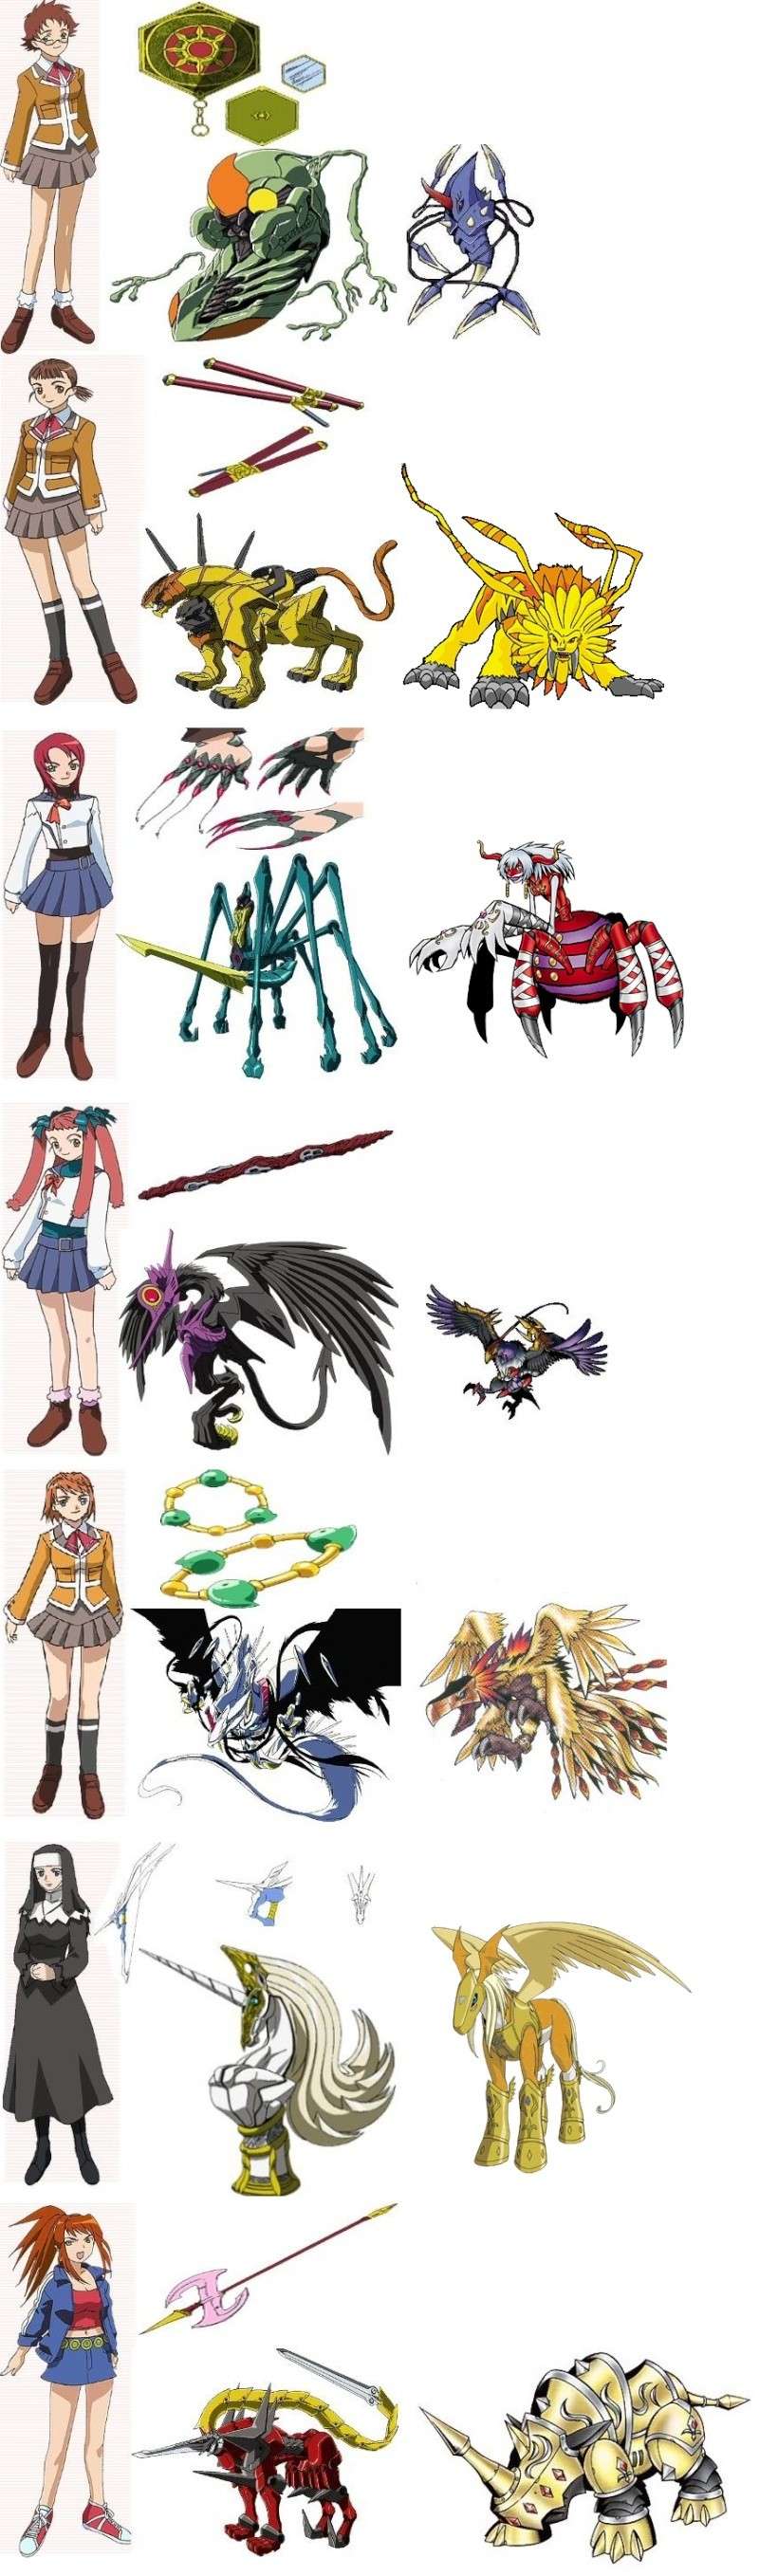 otome - If MAI-Hime/MAI-Otome Characters had Digimon Partners which would fit them Mai_hi10